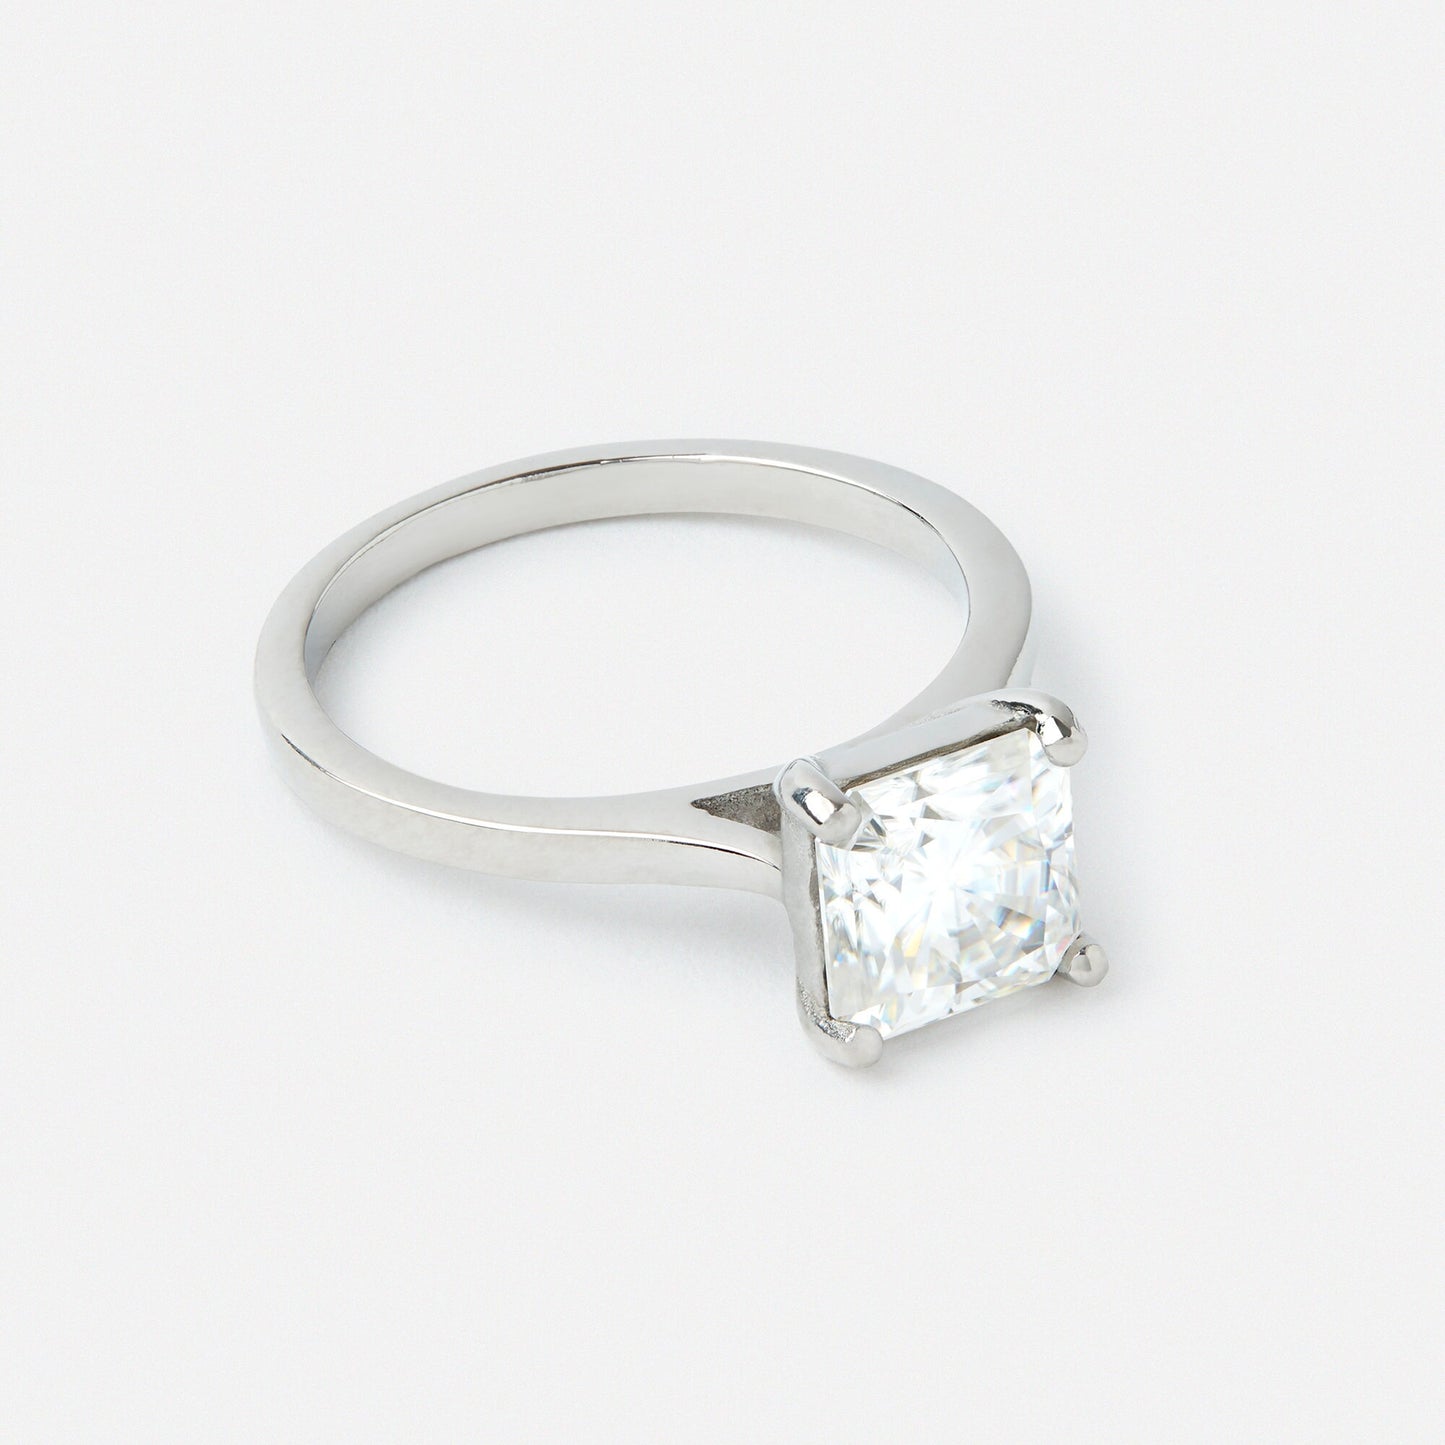 1.5ct Square Radiant Cut moissanite Solitaire cathedral ring in Titanium or White Gold